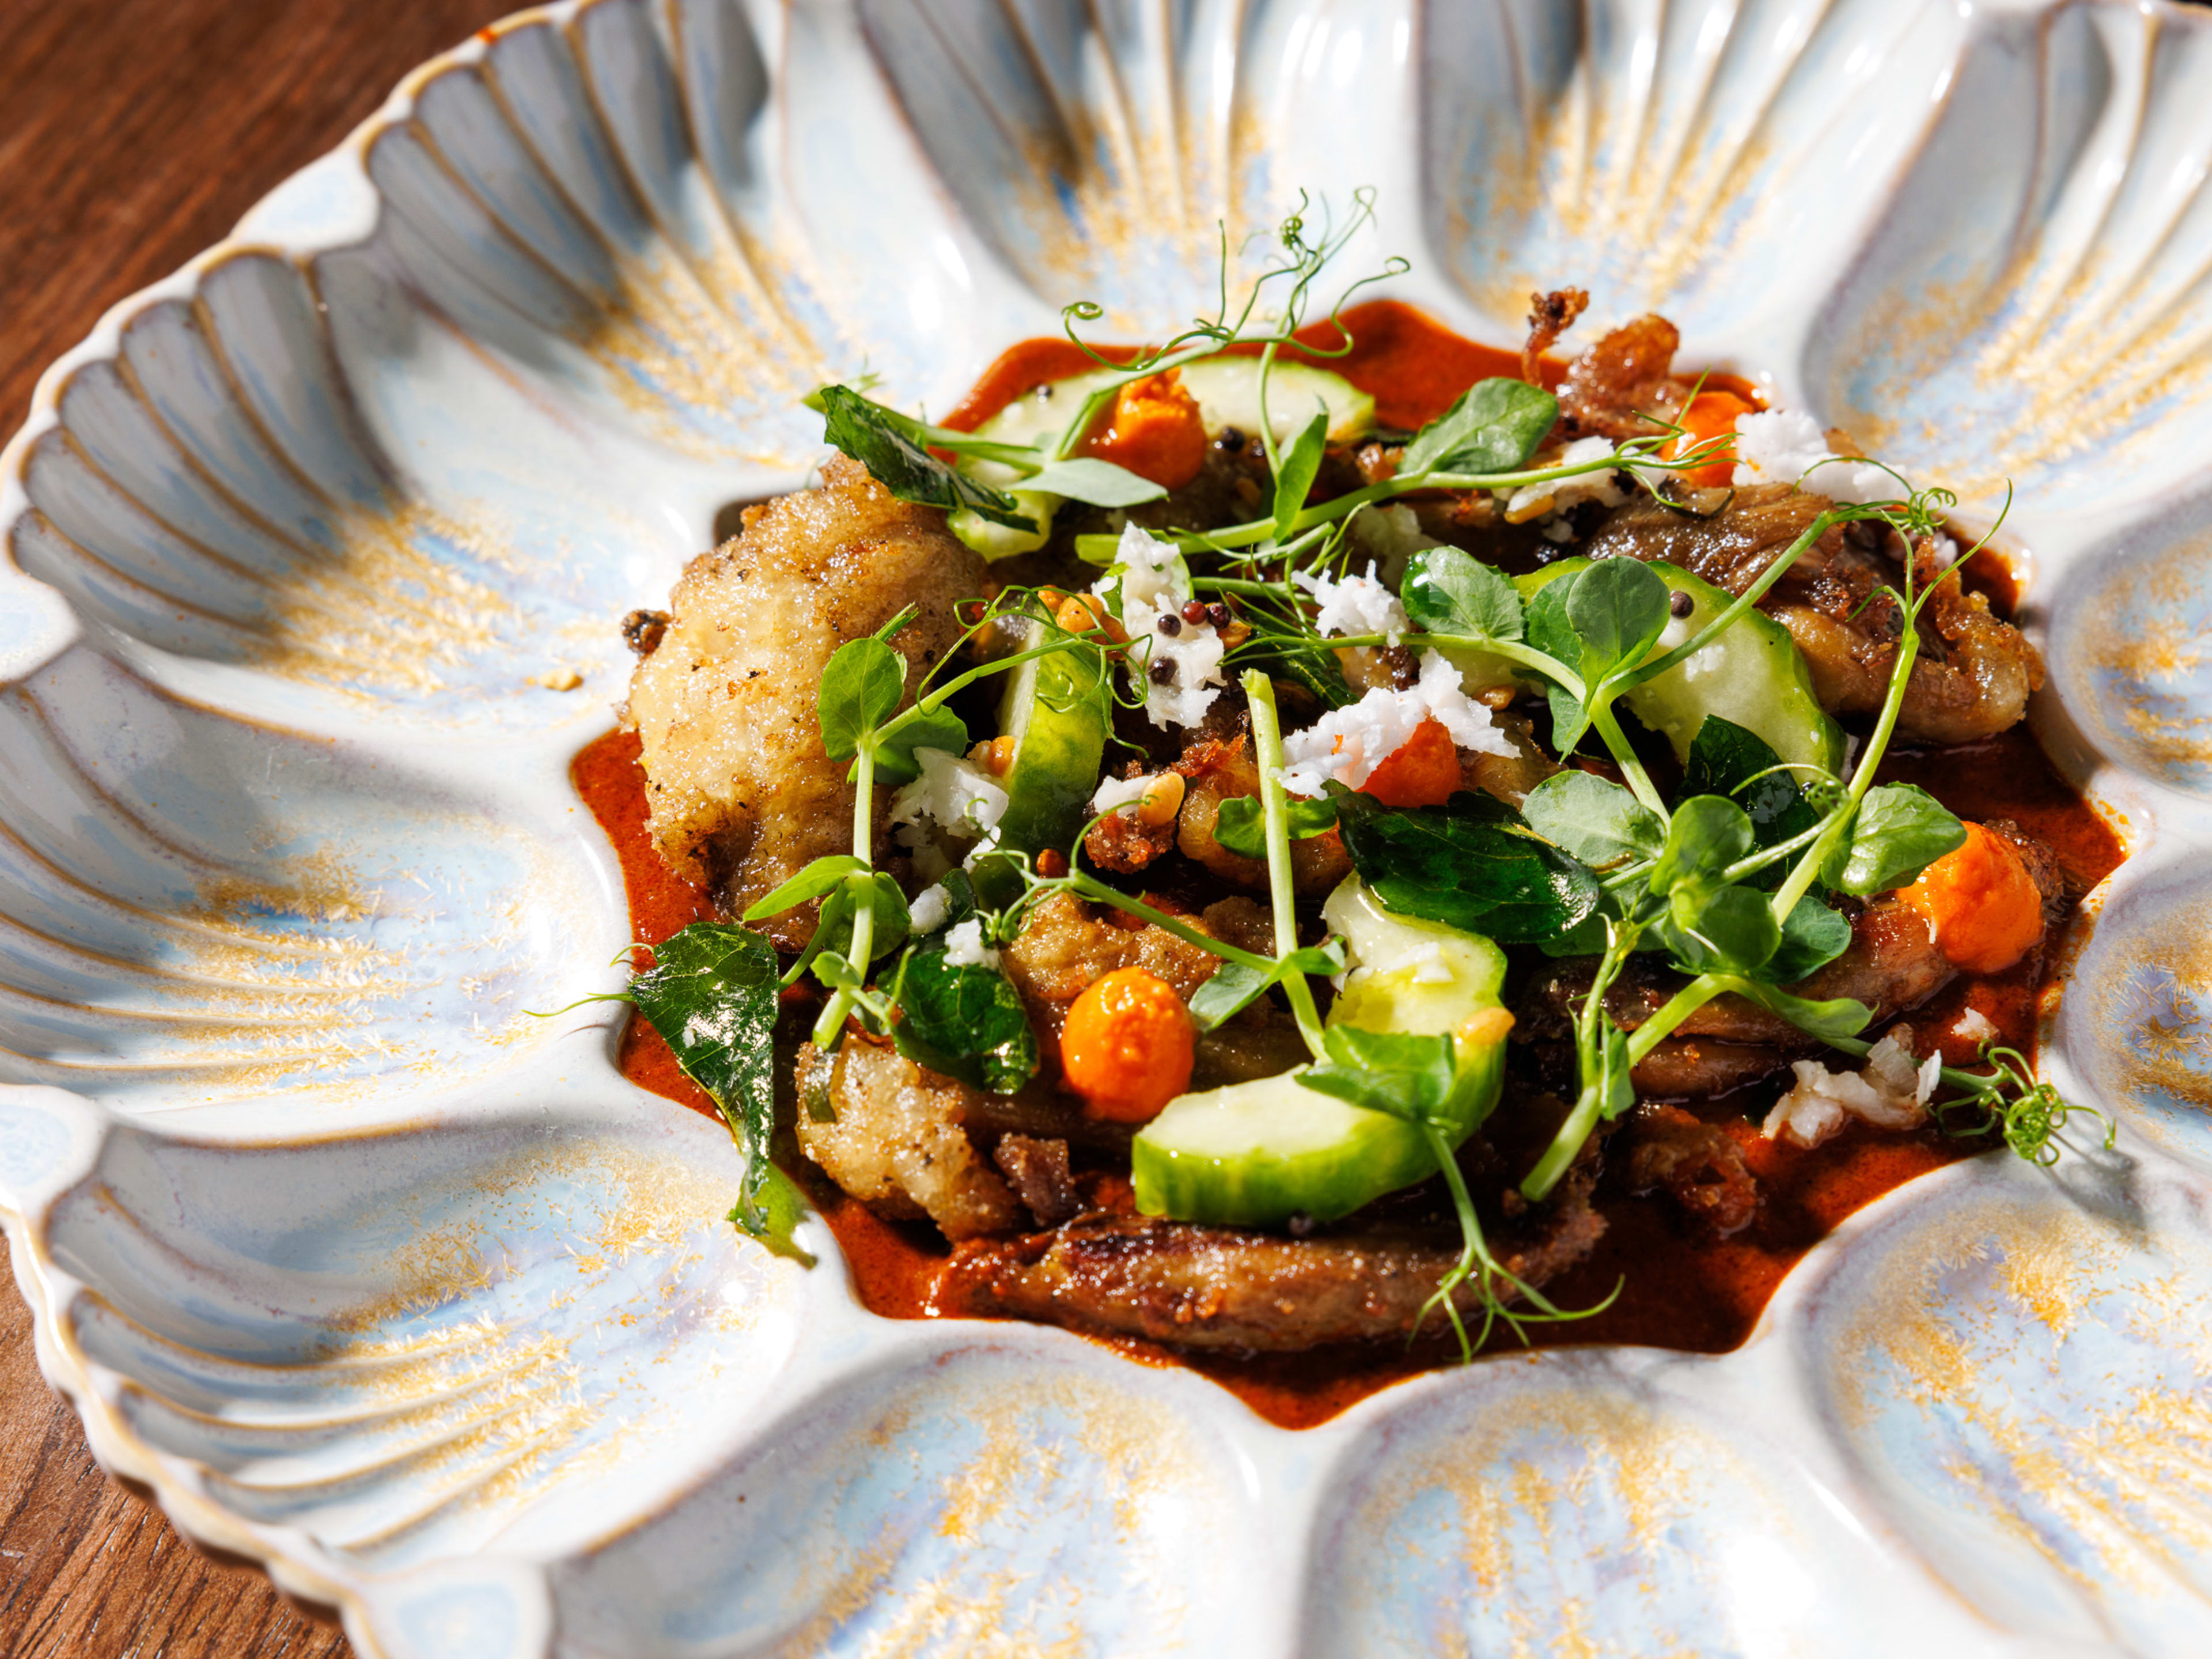 Pieces of roast duck topped with micro greens and cucumber, sitting in a rich red sauce.